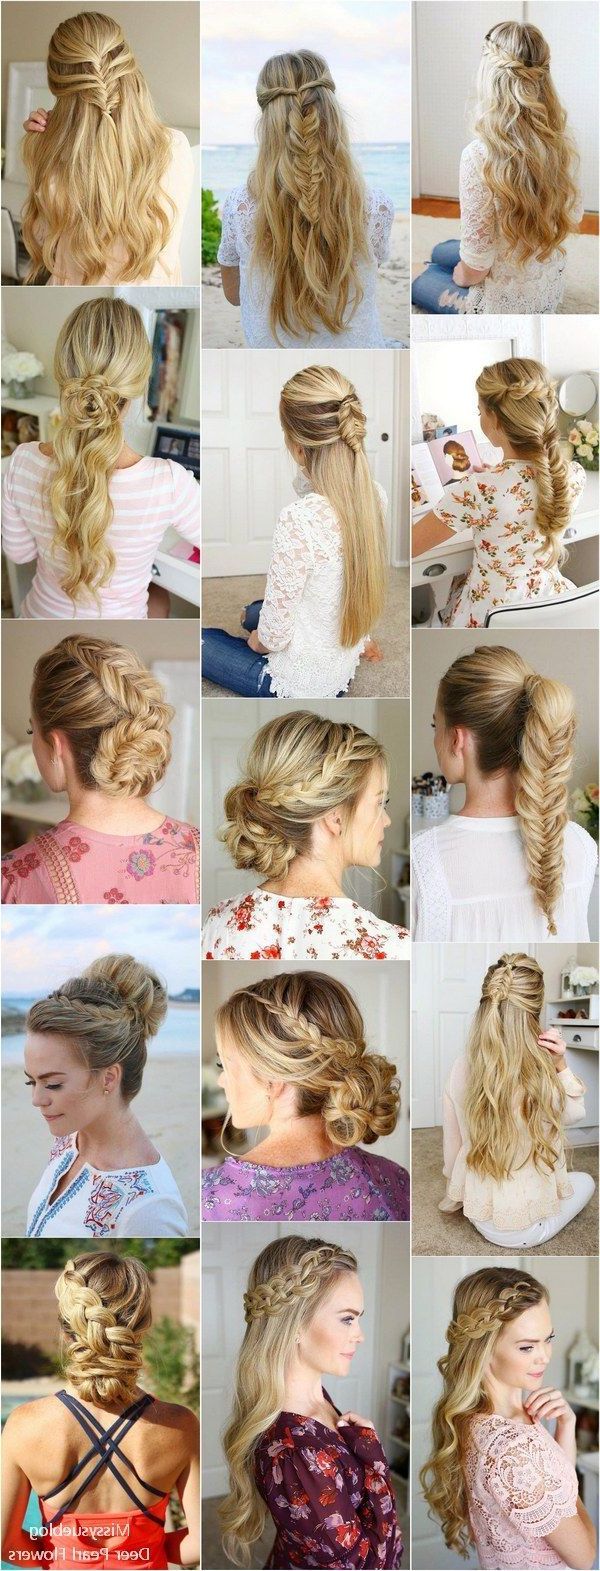 Prom Hairstyles For Long Hair Trending In 2019 Within Most Recent Curled Floral Prom Updos (View 18 of 20)